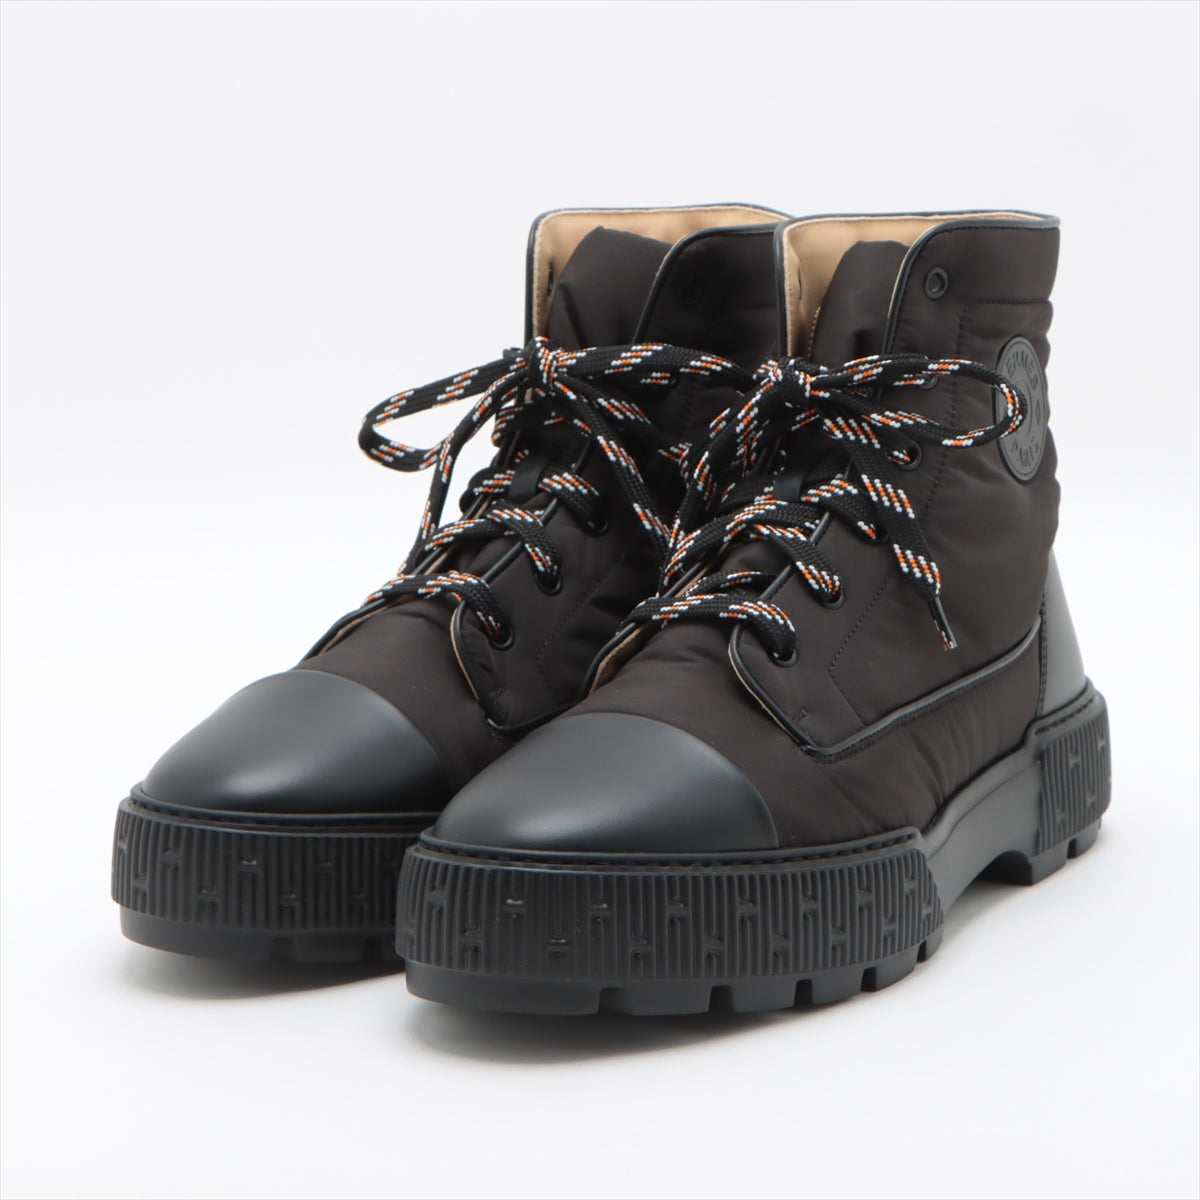 Hermès fresh Leather x fabric Short Boots 42 Men's Black Replaceable cord Box There is a storage bag